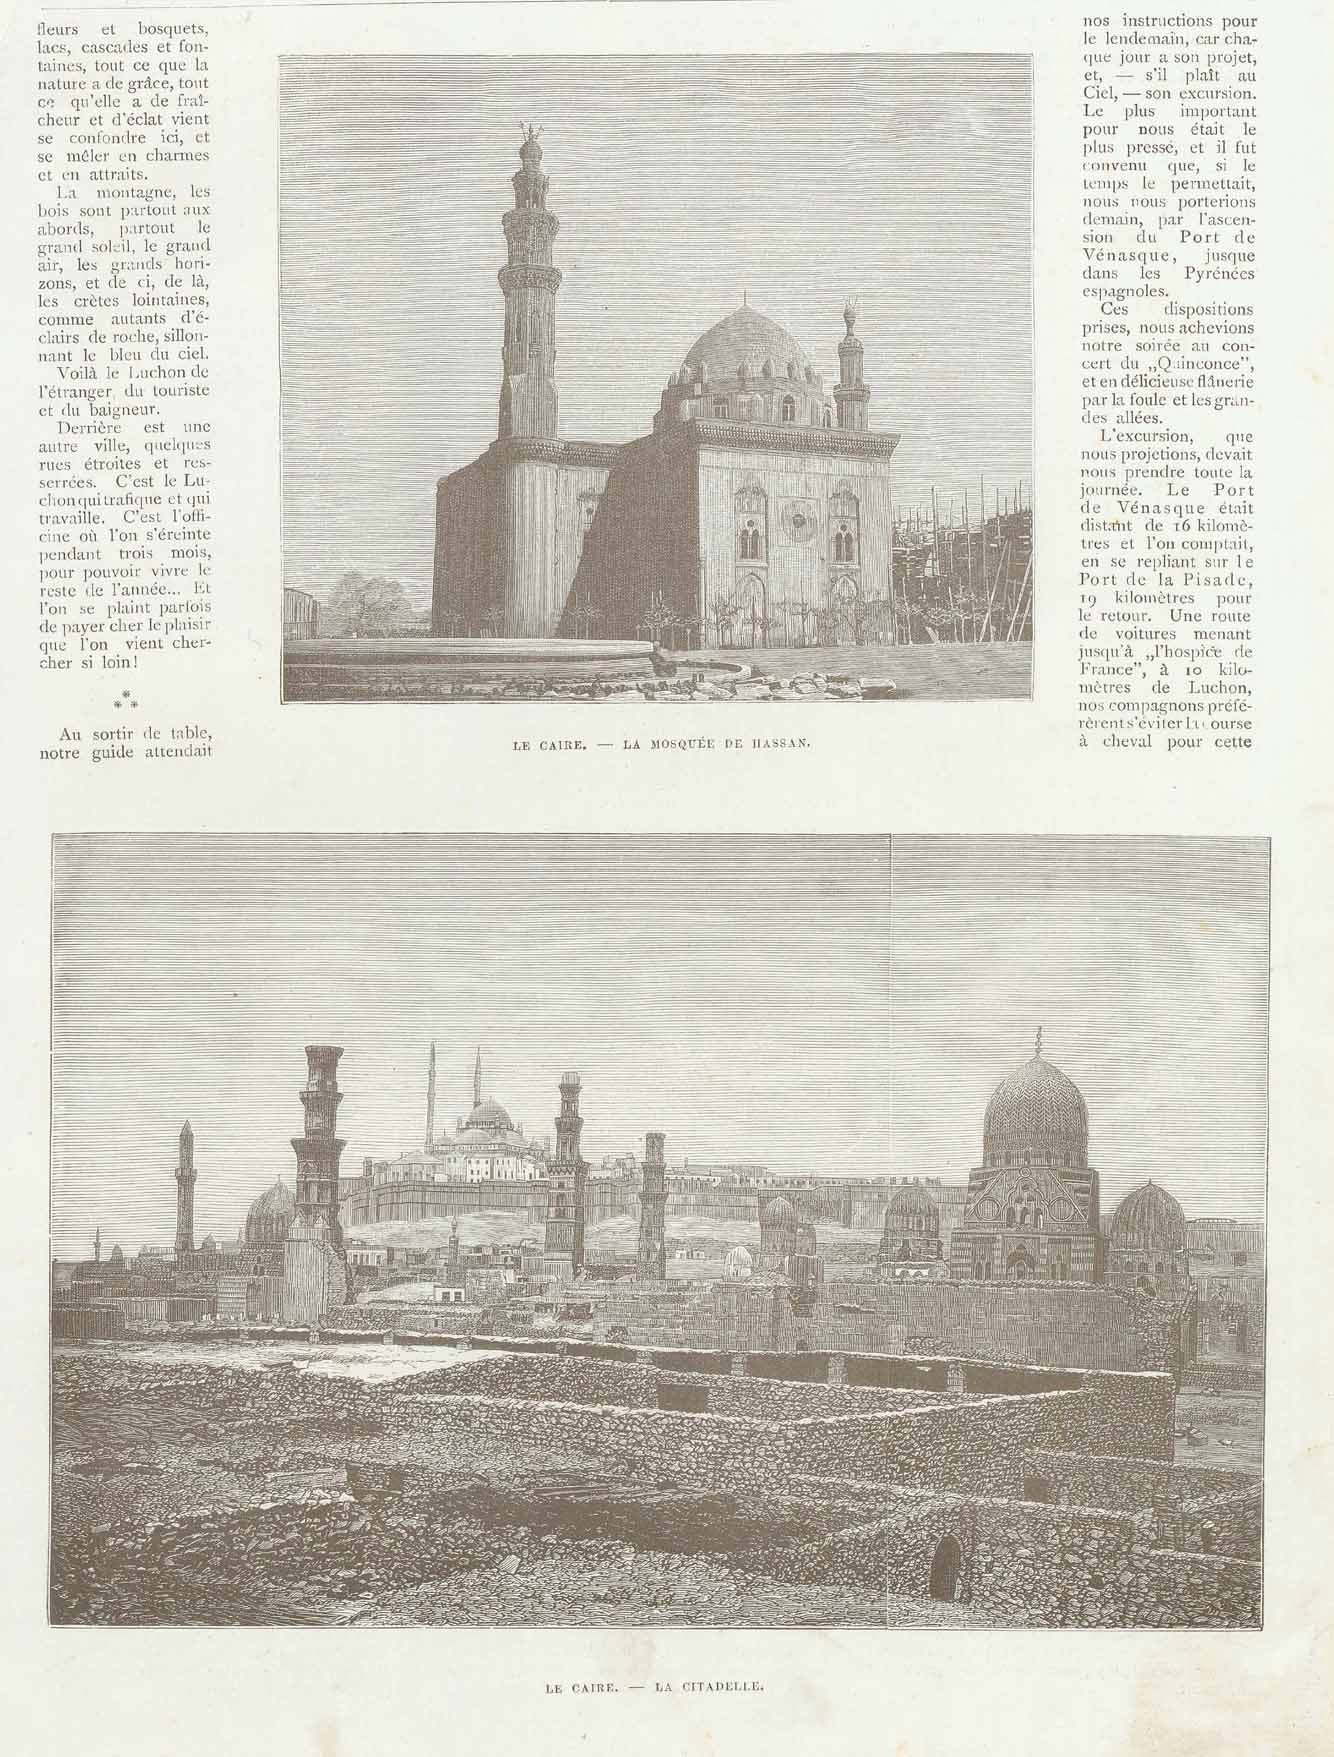 Original antique print  City Views, Egypt, Cairo, Hassan Mosque, Citadelle,Upper image: "Le Caire. - La Mosquee De Hassan" Lower image: " Le Caire. - La Citadelle"  Two wood engravings on a page of unrelated text published 1878.